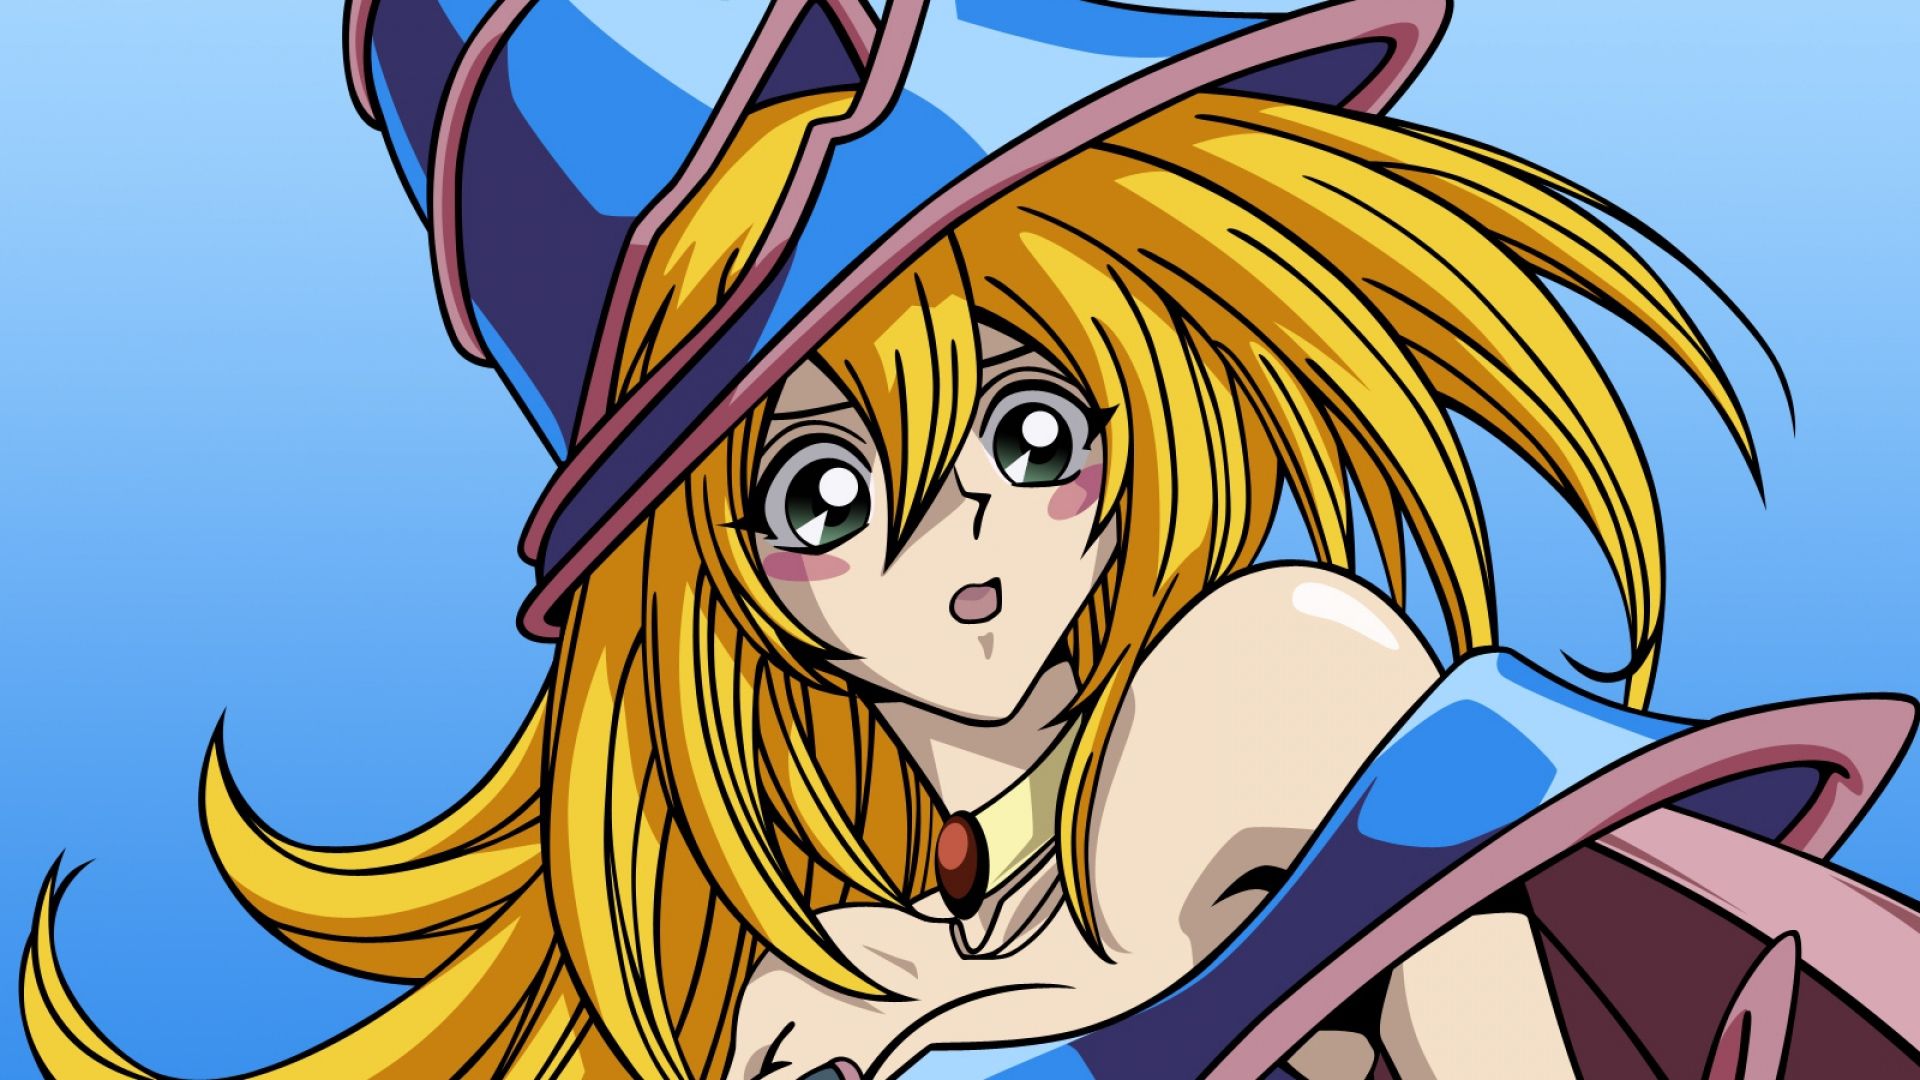 Download Wallpaper 1920x1080 vector art yugioh, girl, witch, hat Full HD 1080p HD Background